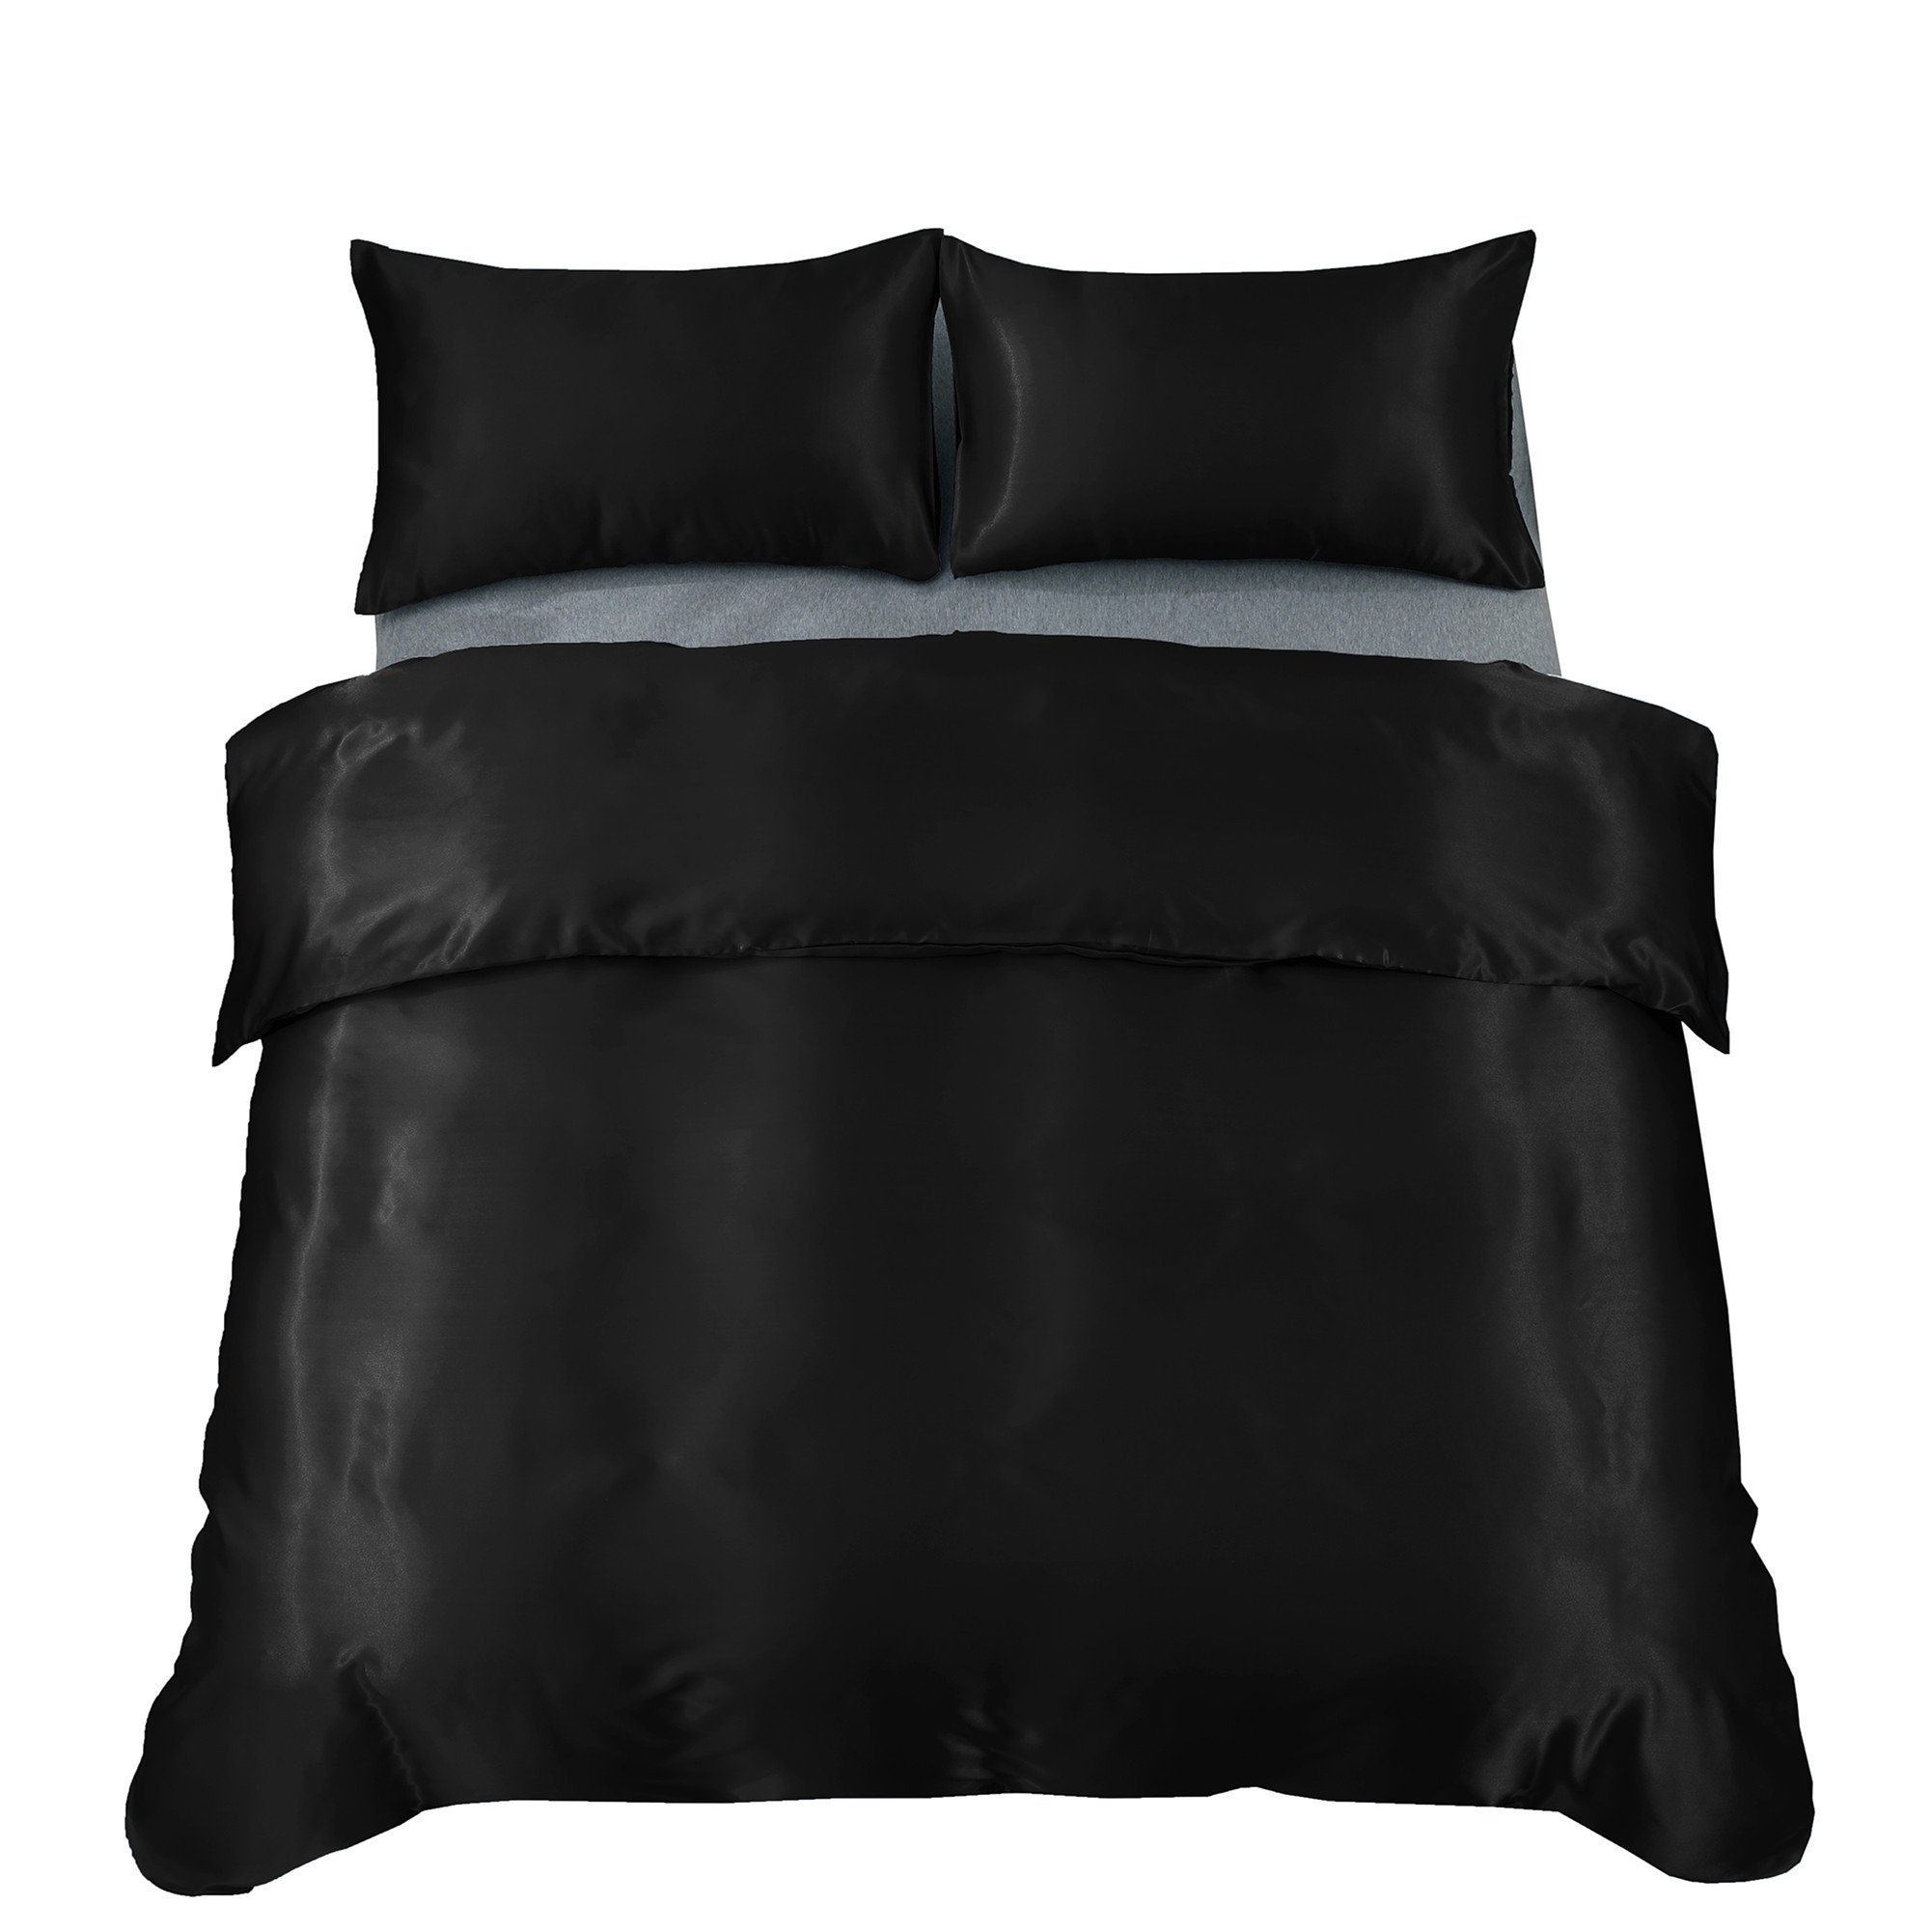 Black Silky Summer Duvet Cover Set Flat Fitted Sheets Smooth - Etsy